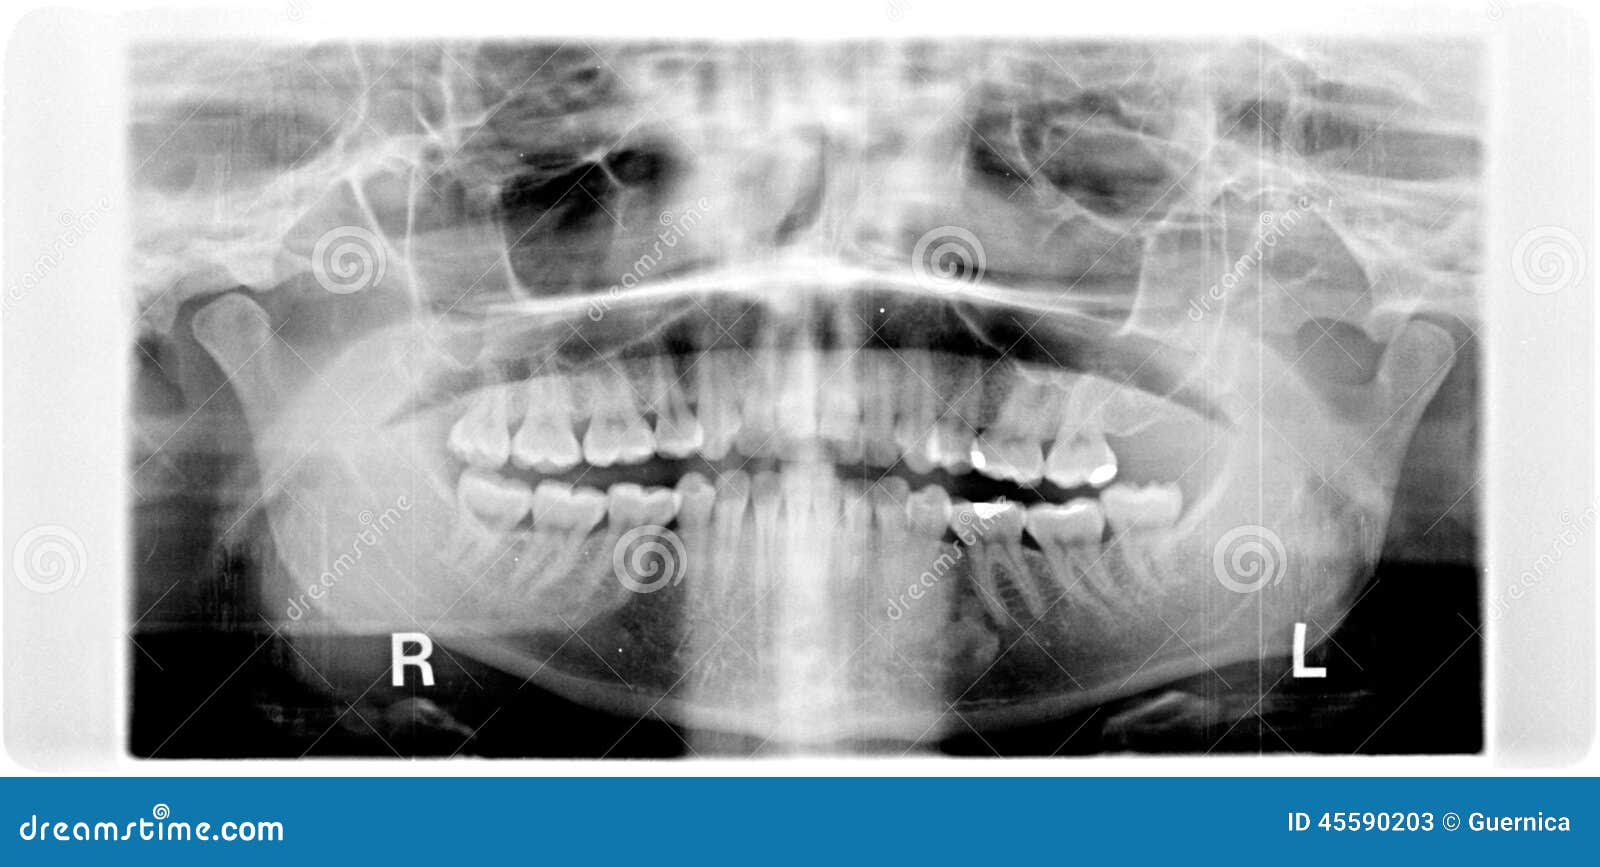 panorama of damaged jaw erosion of the joint tmj